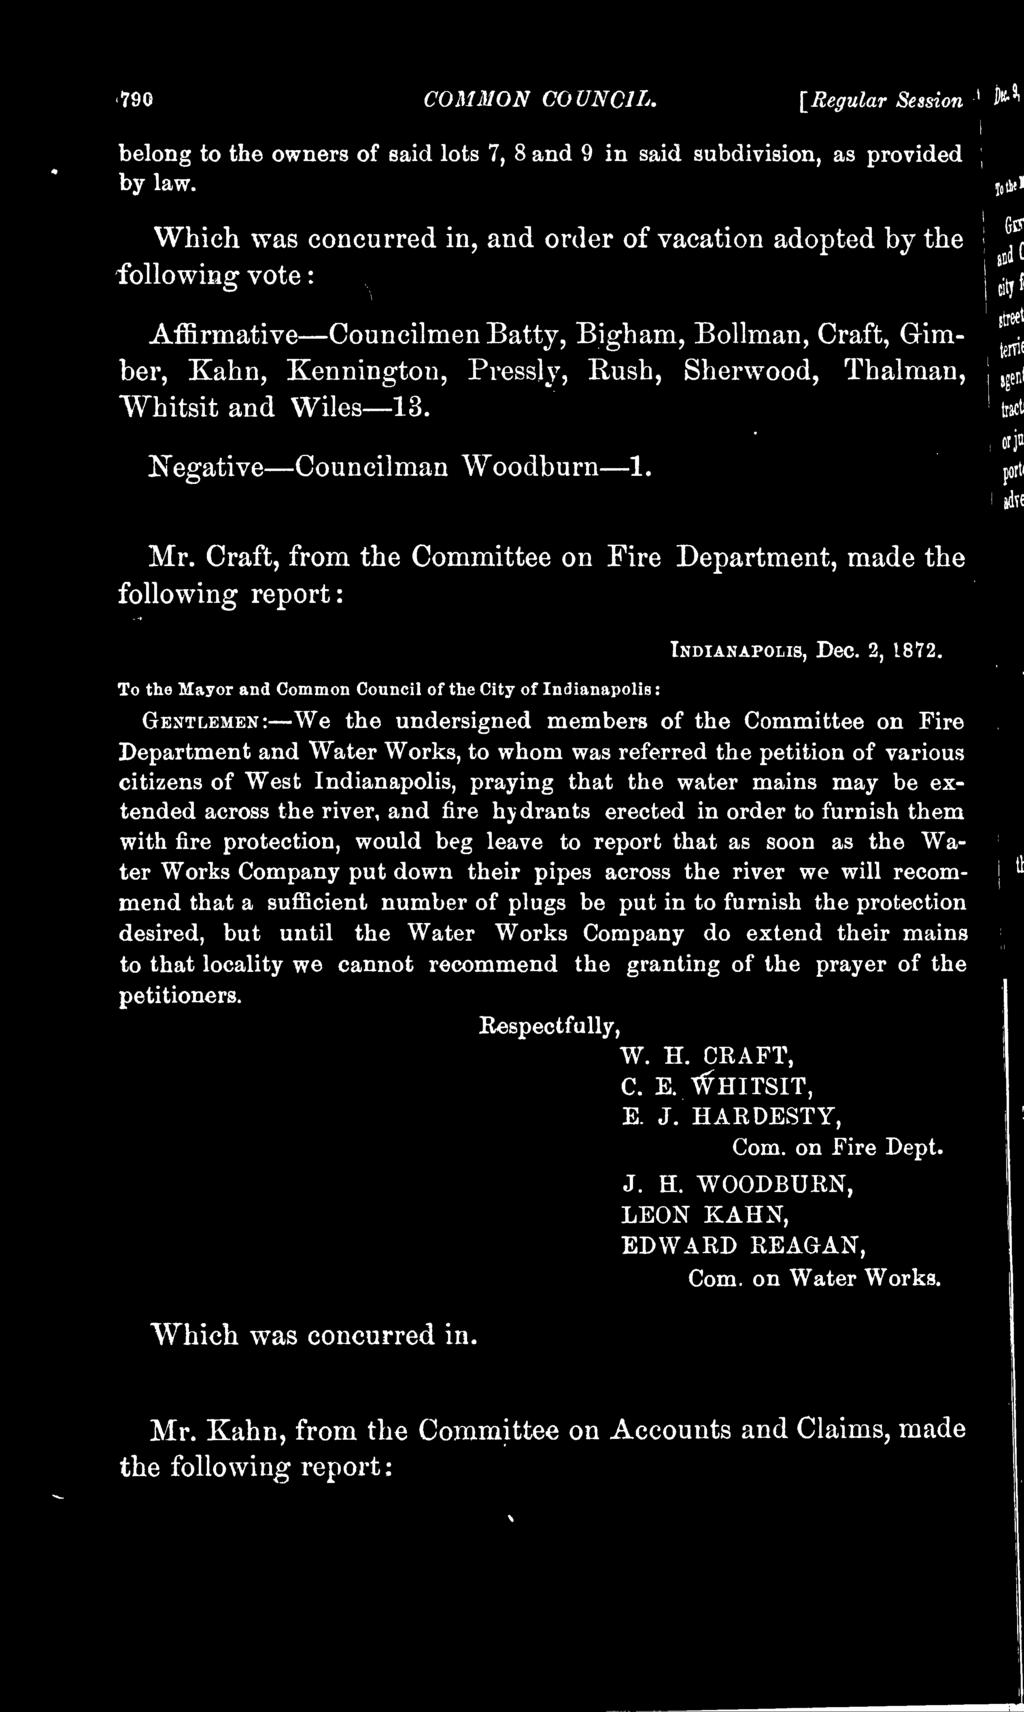 Department and Water Works, to whom was referred the petition of various citizens of West Indianapolis, praying that the water mains may be extended across the river, and fire hydrants erected in